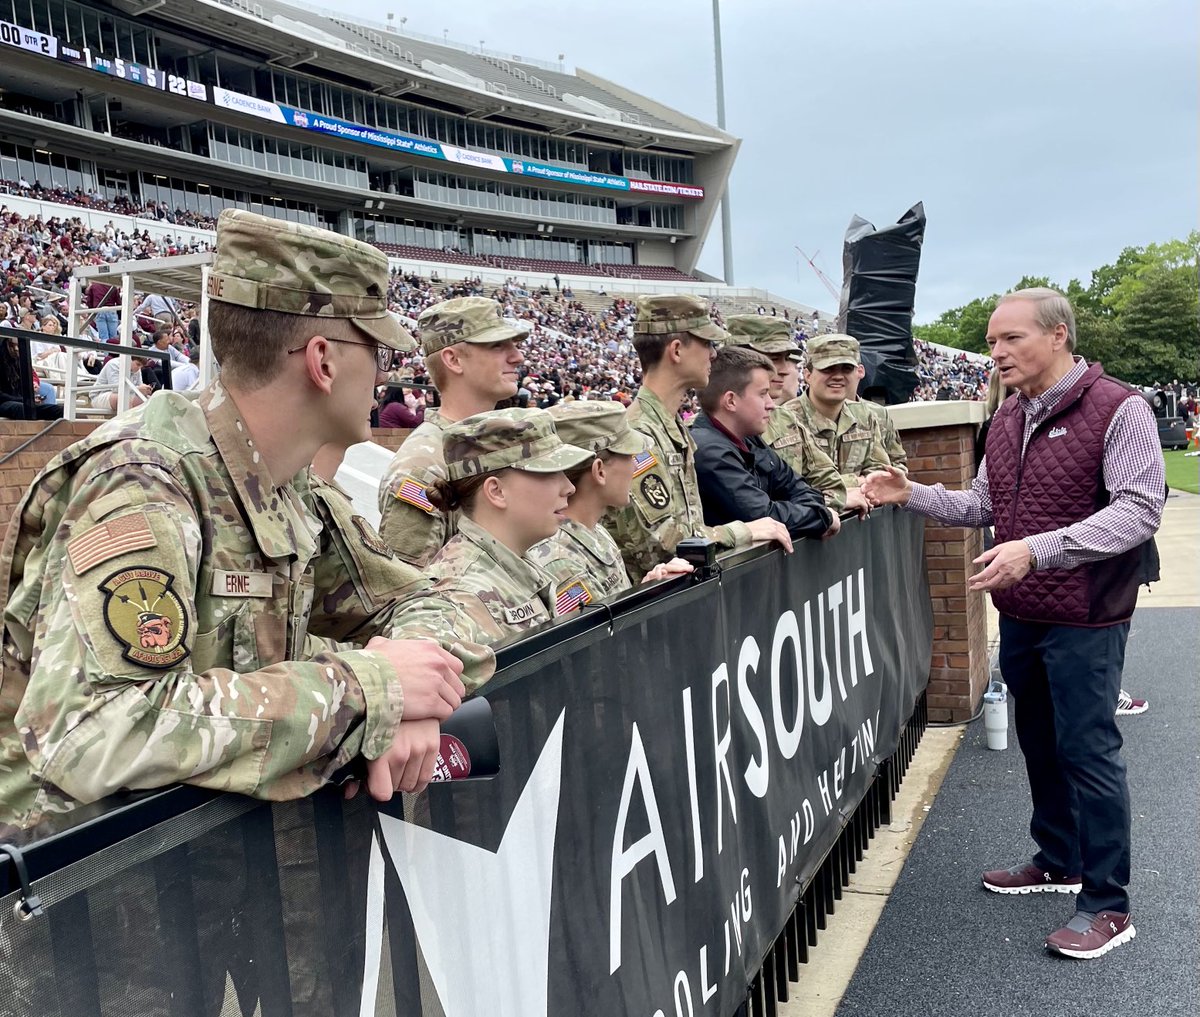 Mississippi State President Mark Keenum greeted cadets from MSU’s Army ROTC spirit squad who add to the celebration of Bulldog touchdowns with pushups. The cadets received their annual achievement awards at the Chapel of Memories on April 25. Graduating seniors await commissions.